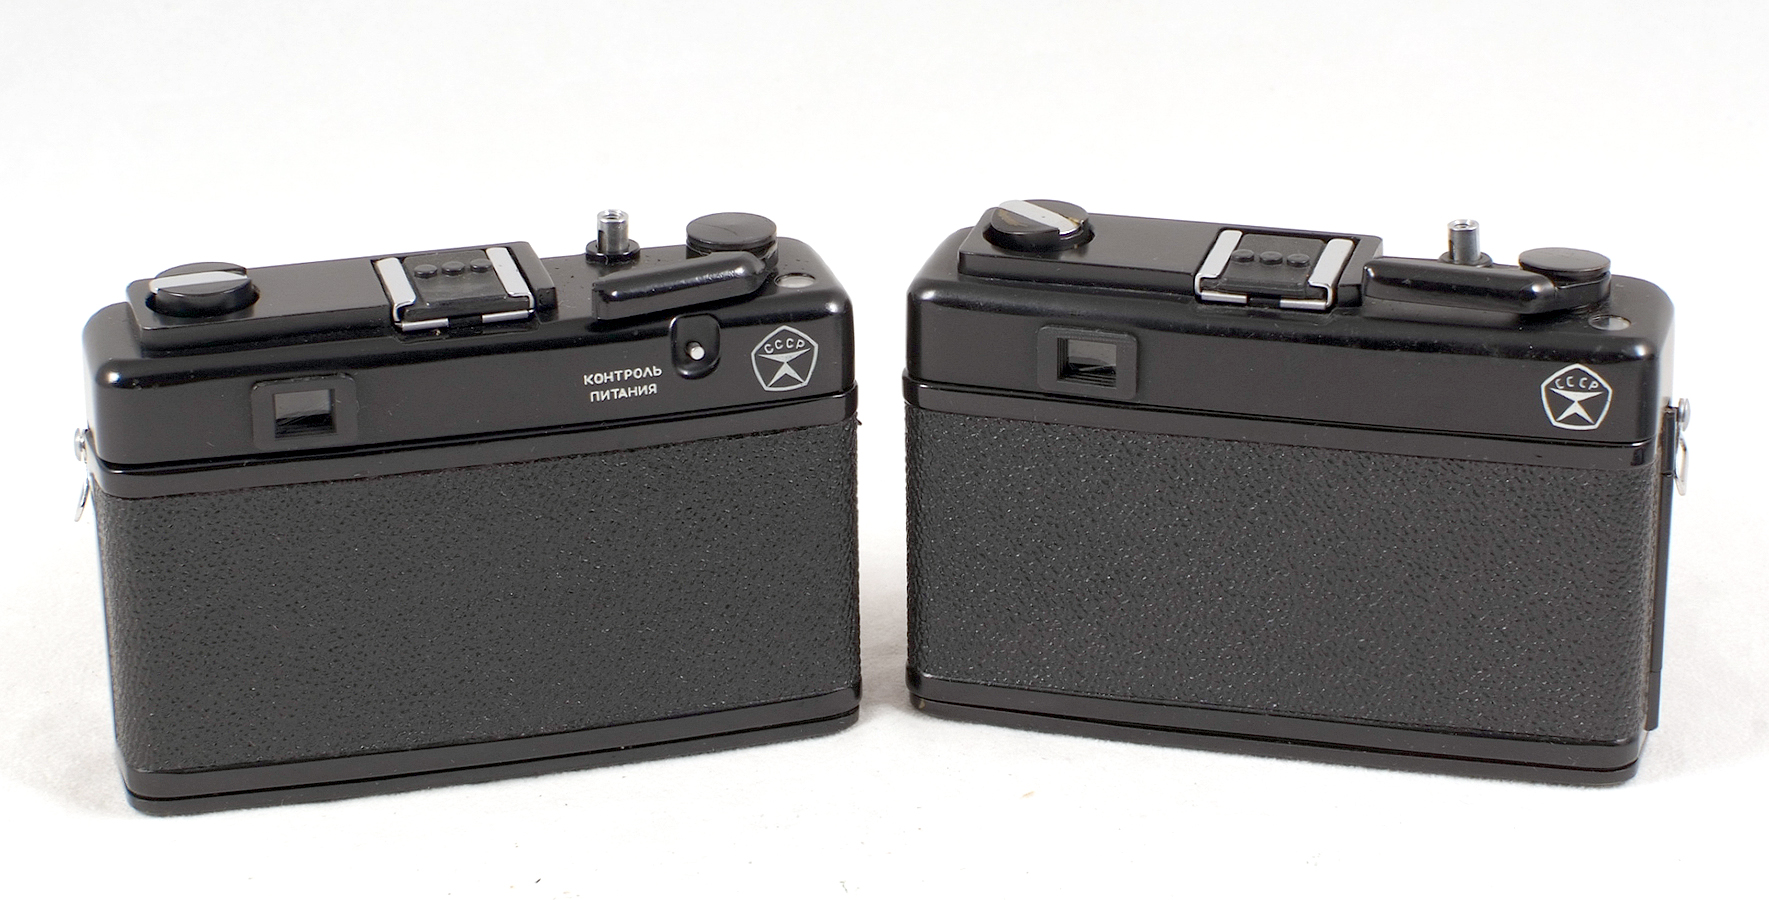 Rare FED-35 1985-86. With lens cap, case, manual & box. INDUSTAR-81 2.8/38. - Image 3 of 3